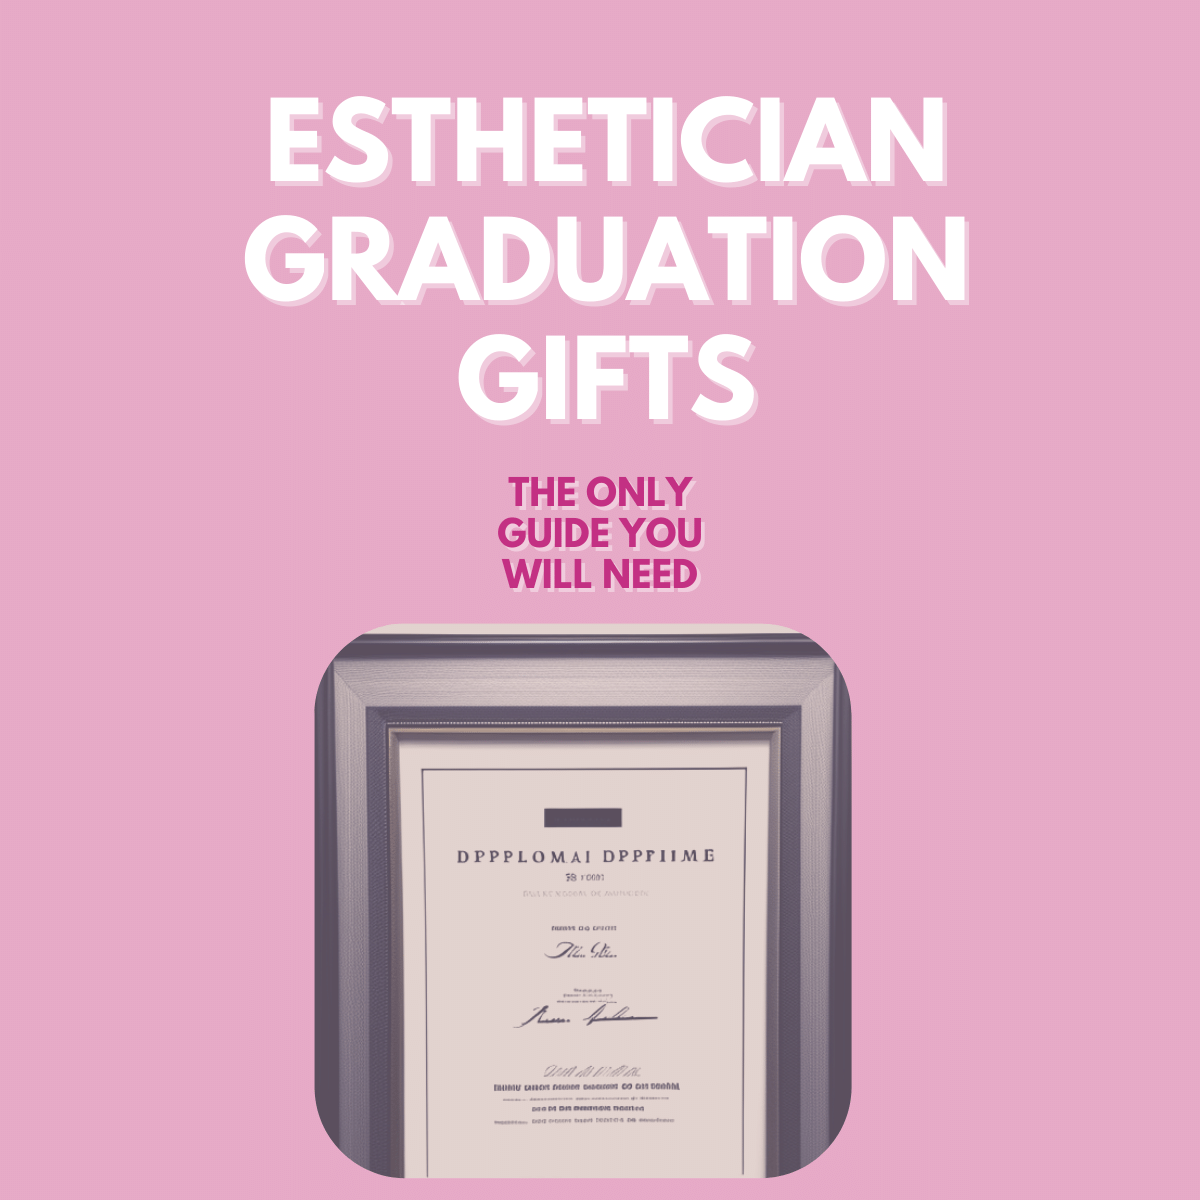 Esthetician Graduation Gifts: the Only Guide You'll Need!